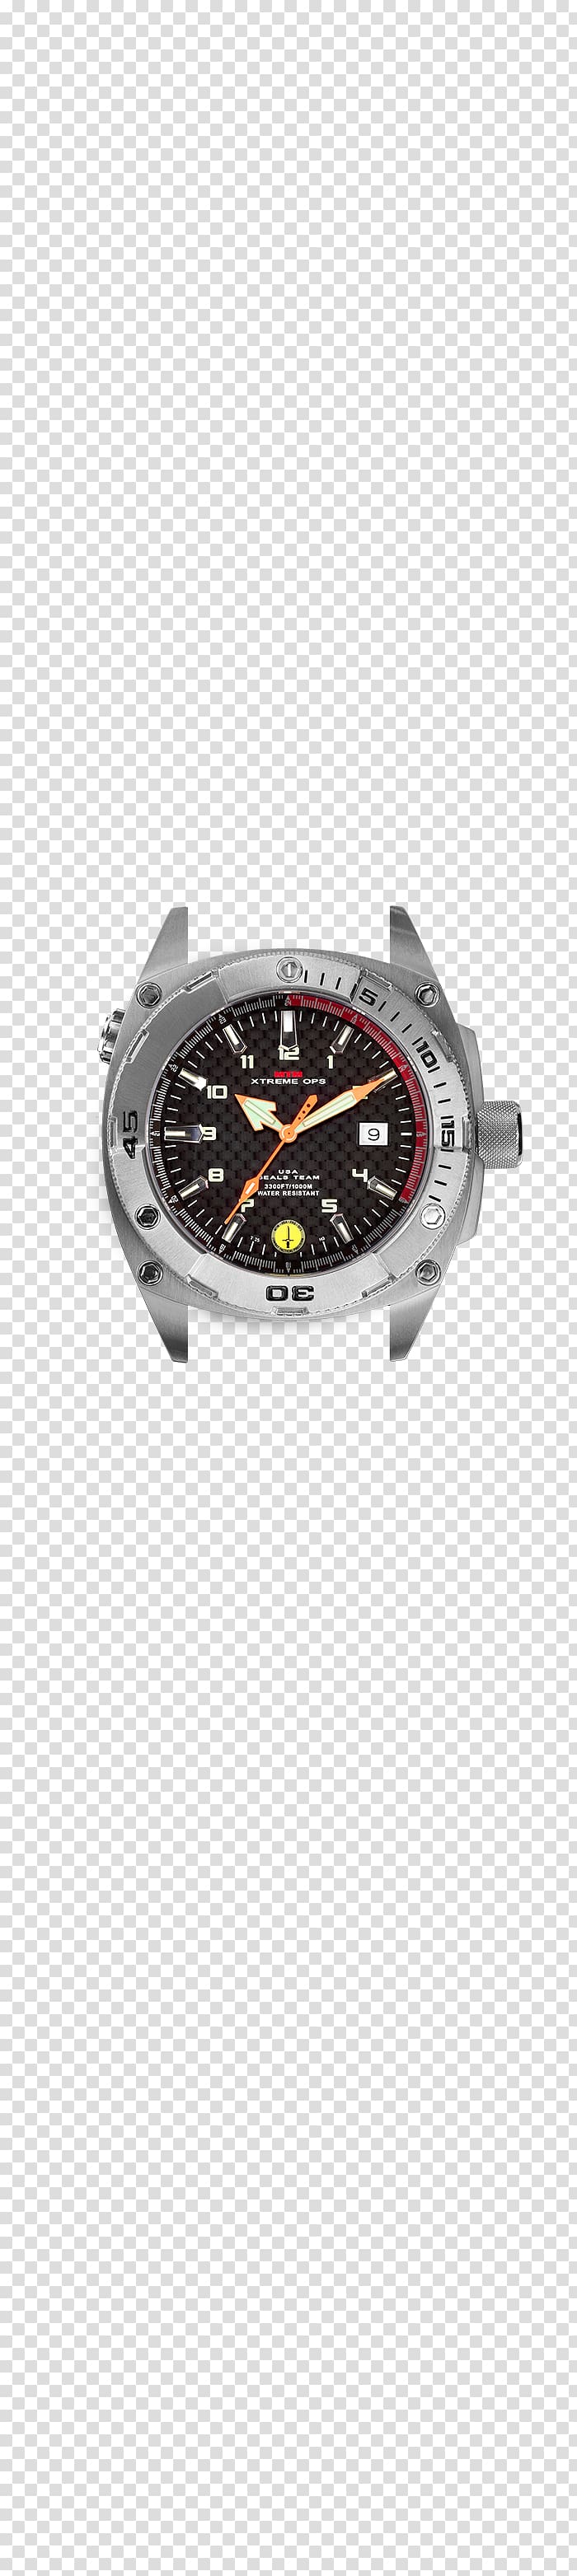 Analog watch Panerai Dial Military watch, watch transparent background PNG clipart